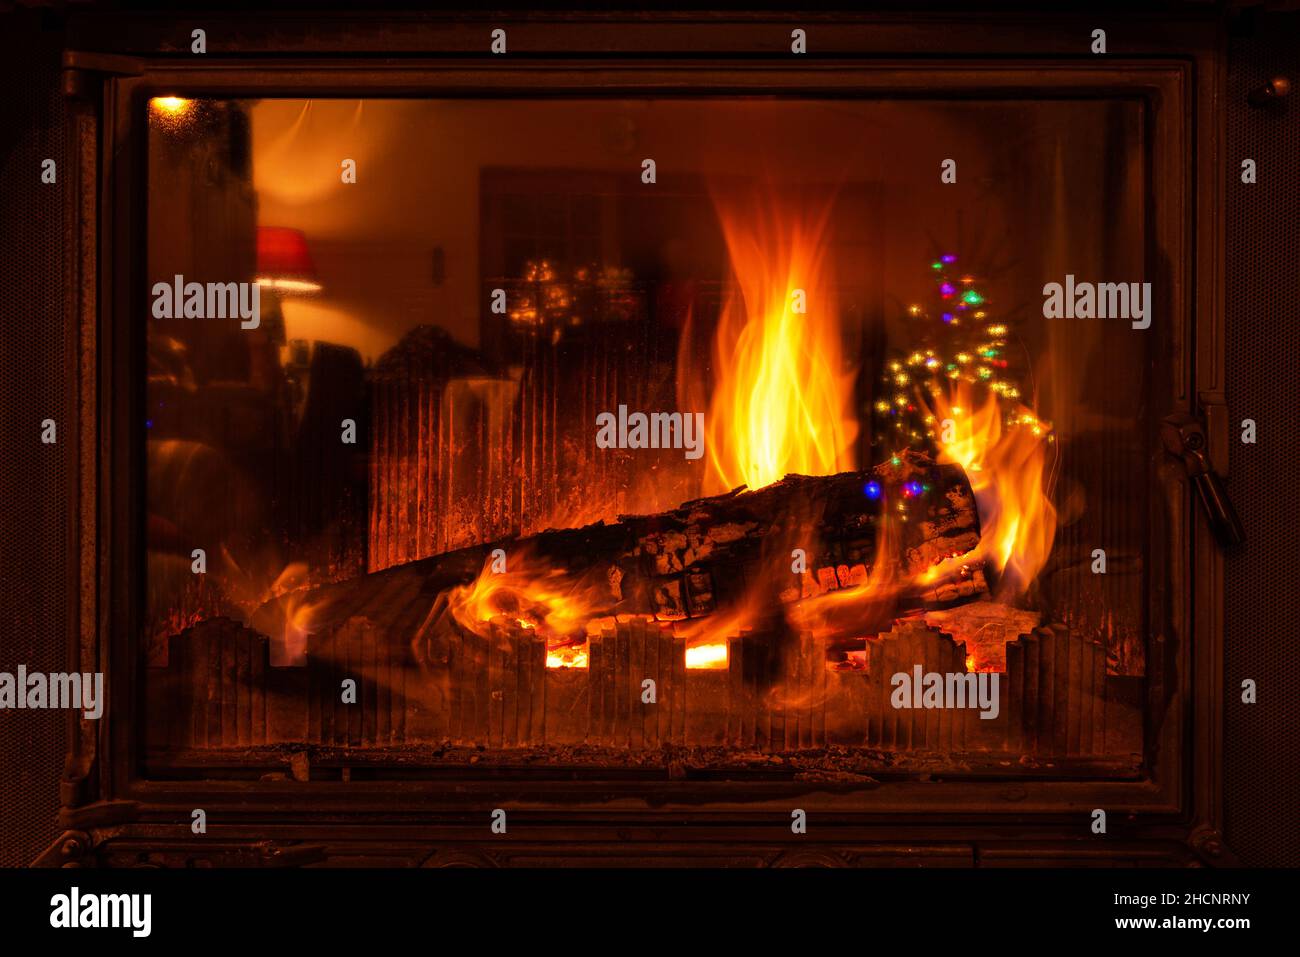 Wood logs burning in a fireplace for Christmas. A Christmas tree decorated with light tinsels is reflected on the glass of the fireplace. Stock Photo